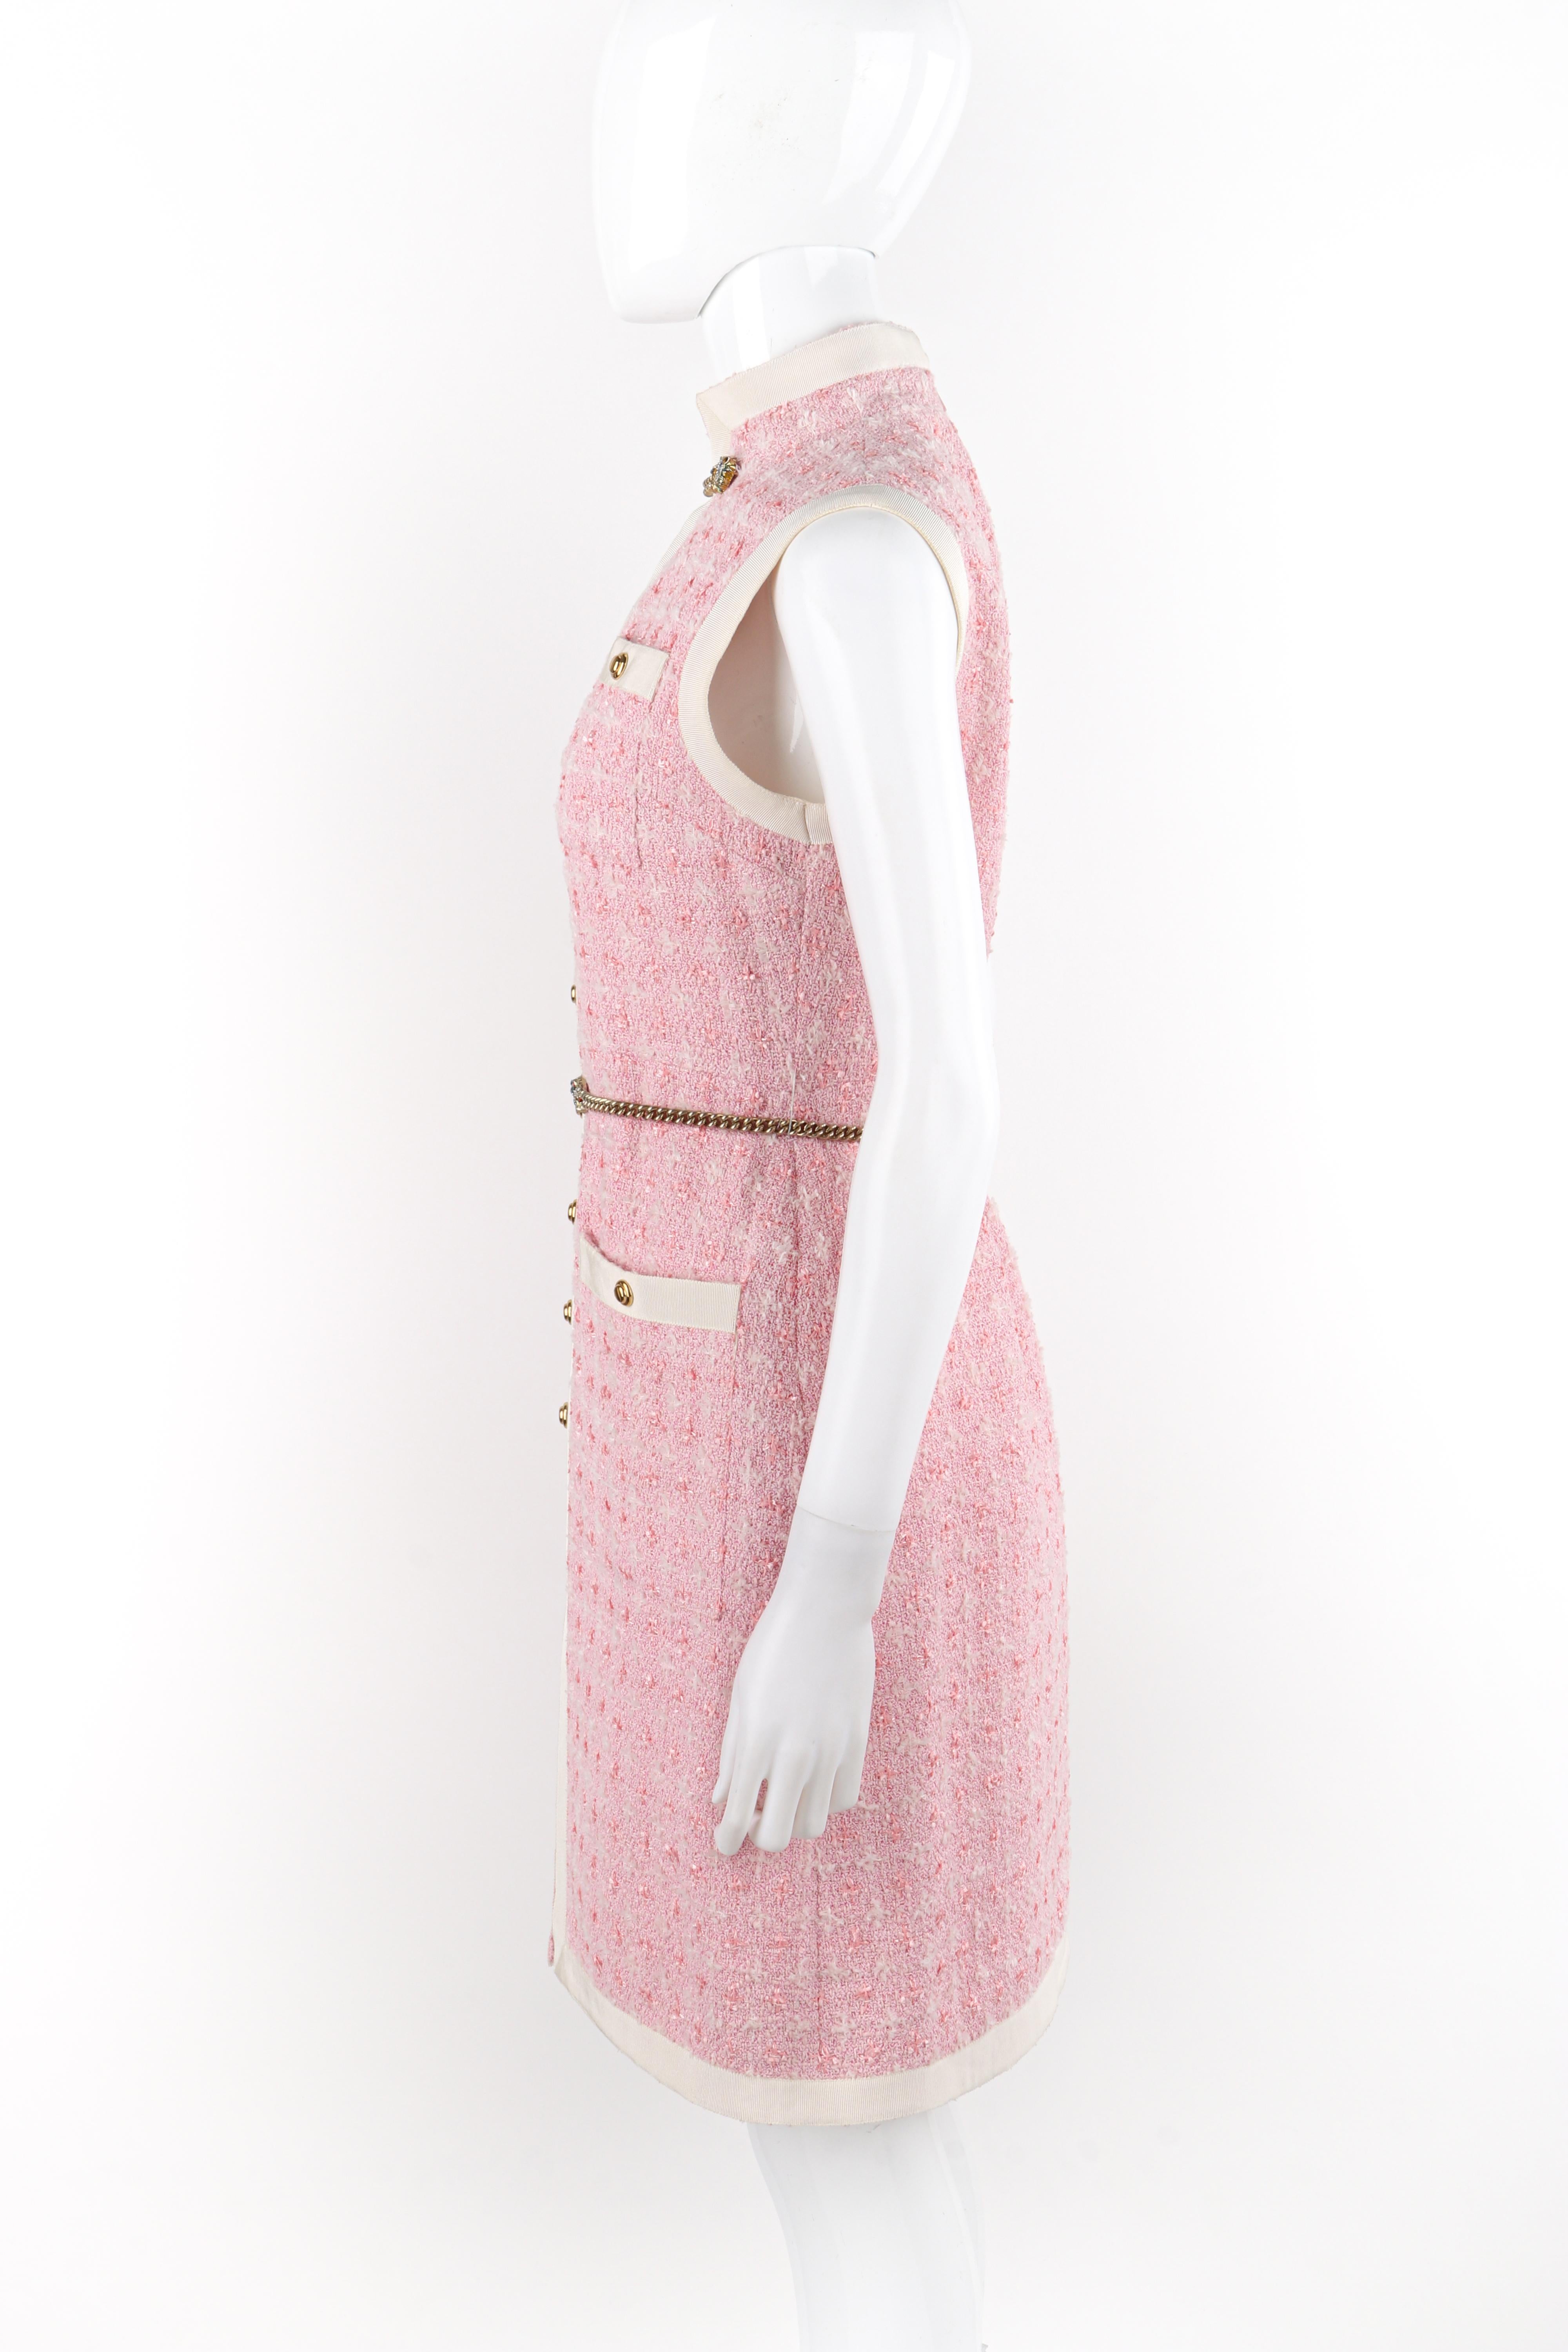 GUCCI S/S 2019 Pink White Gold Boucle Tweed Tiger Chain Belt Sleeveless Dress For Sale 2